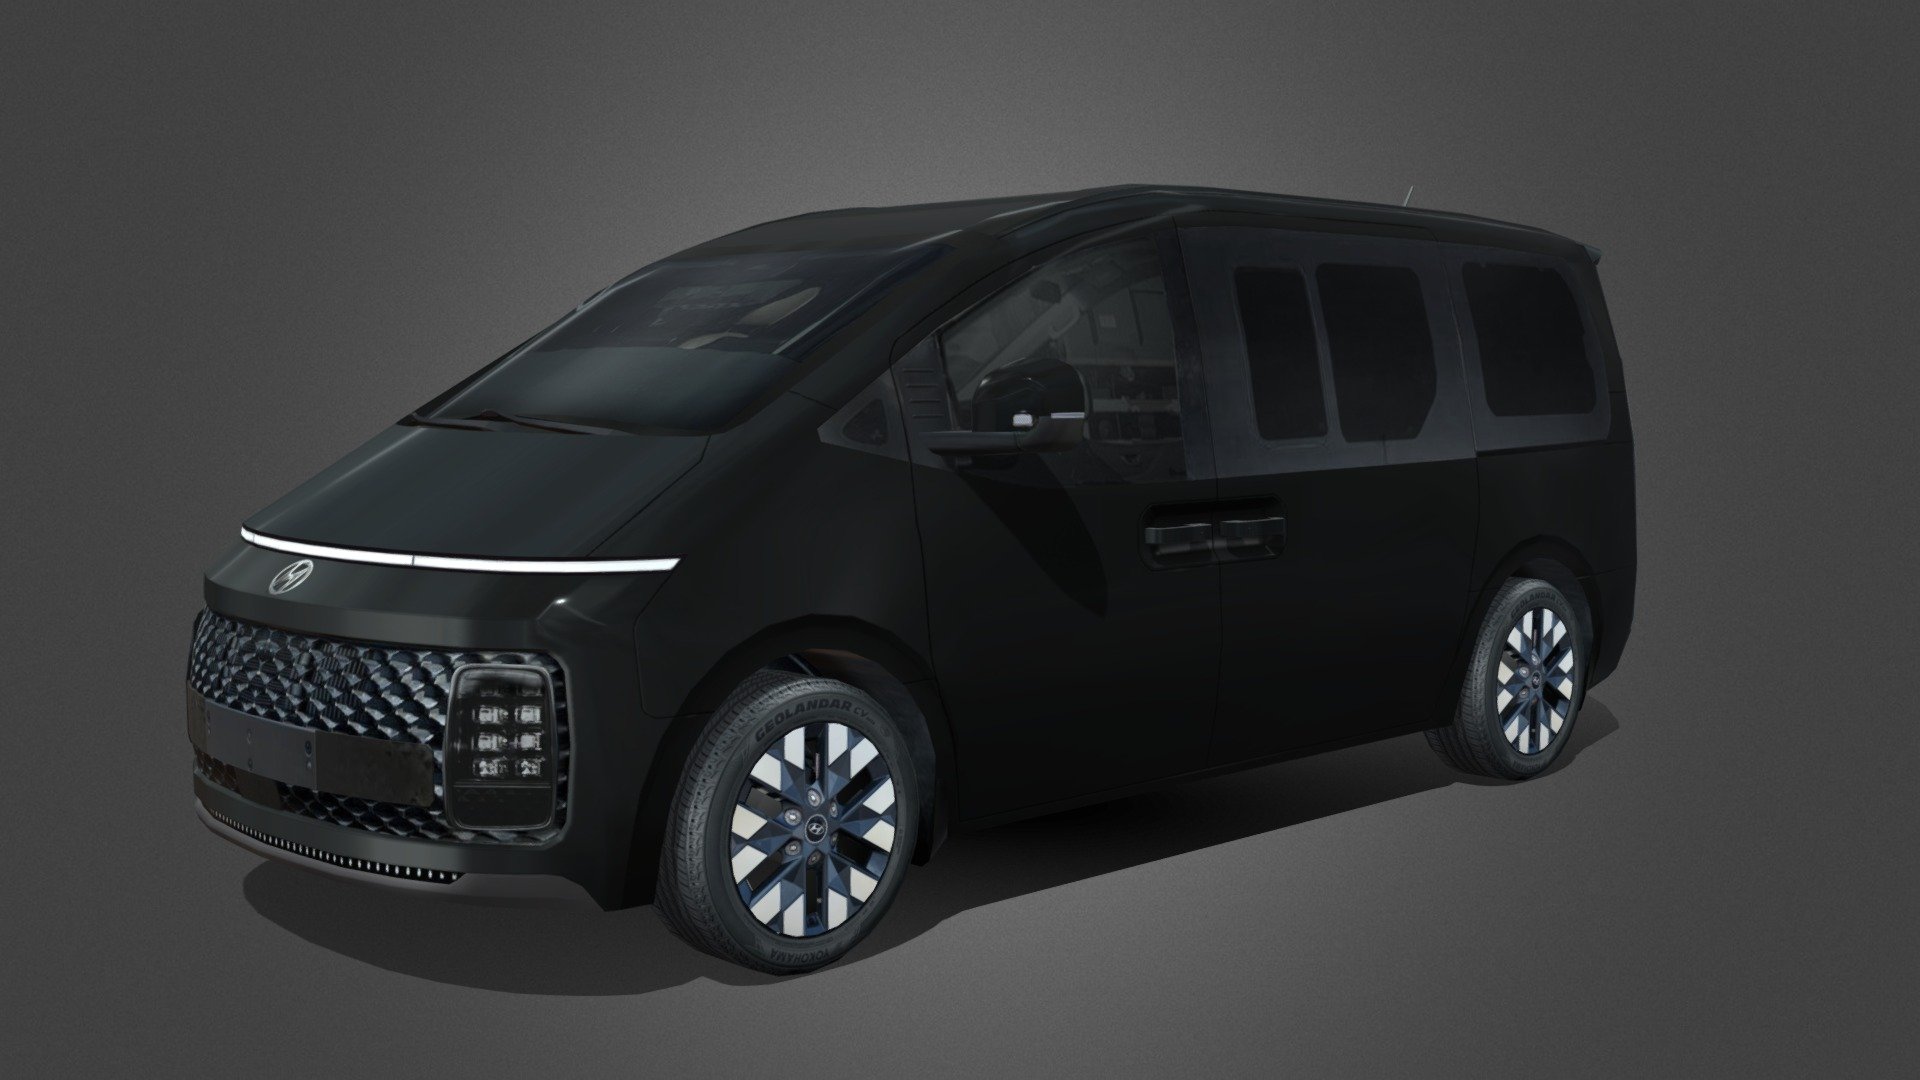 5-door minivan manufactured by Hyundai since 2021.
The model uses the optimal number of polygons for light situational scenes, traffic simulation. PSD texture on request.

The license type is set by sketchfab. If you need a standard license - tell me about it 3d model